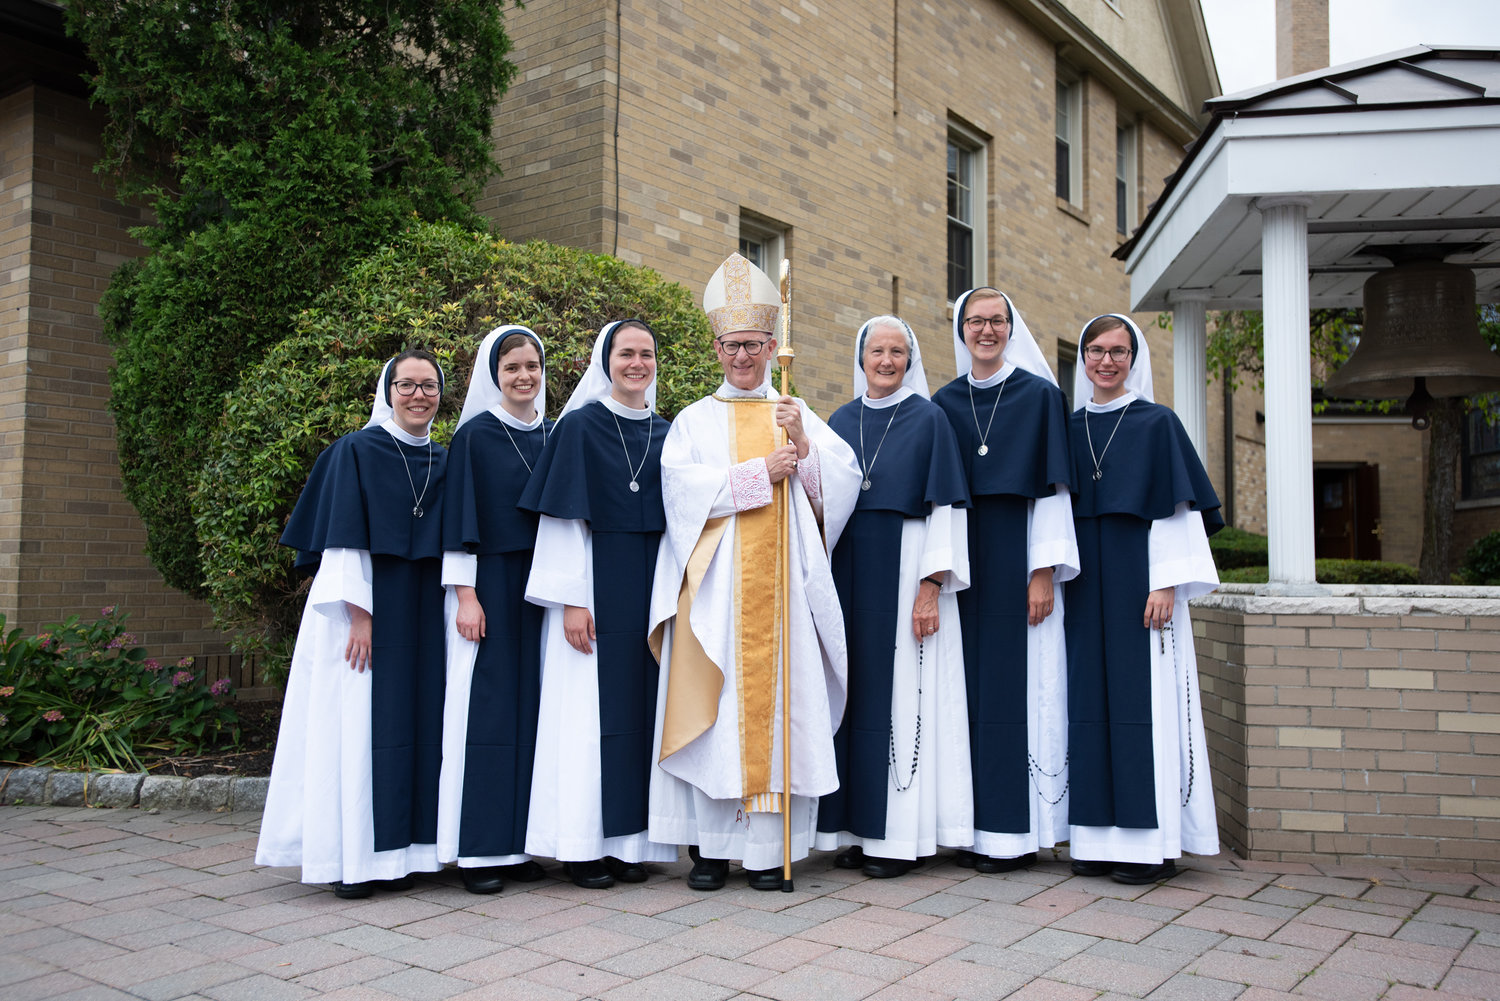 The five newly professed Sisters of Life join Bishop James Conley of Lincoln, Neb., who offered the Mass of Profession, and Mother Agnes Mary Donovan, S.V., superior general, outside Sacred Heart Church in Suffern June 26. They are, from left, Sister Eden Marie, S.V., Sister Rose Patrick O'Connor, S.V., Sister Maria Annunciata, S.V., Sister Elena Marie, S.V., and Sister Noelle Marie Bethlehem, S.V.